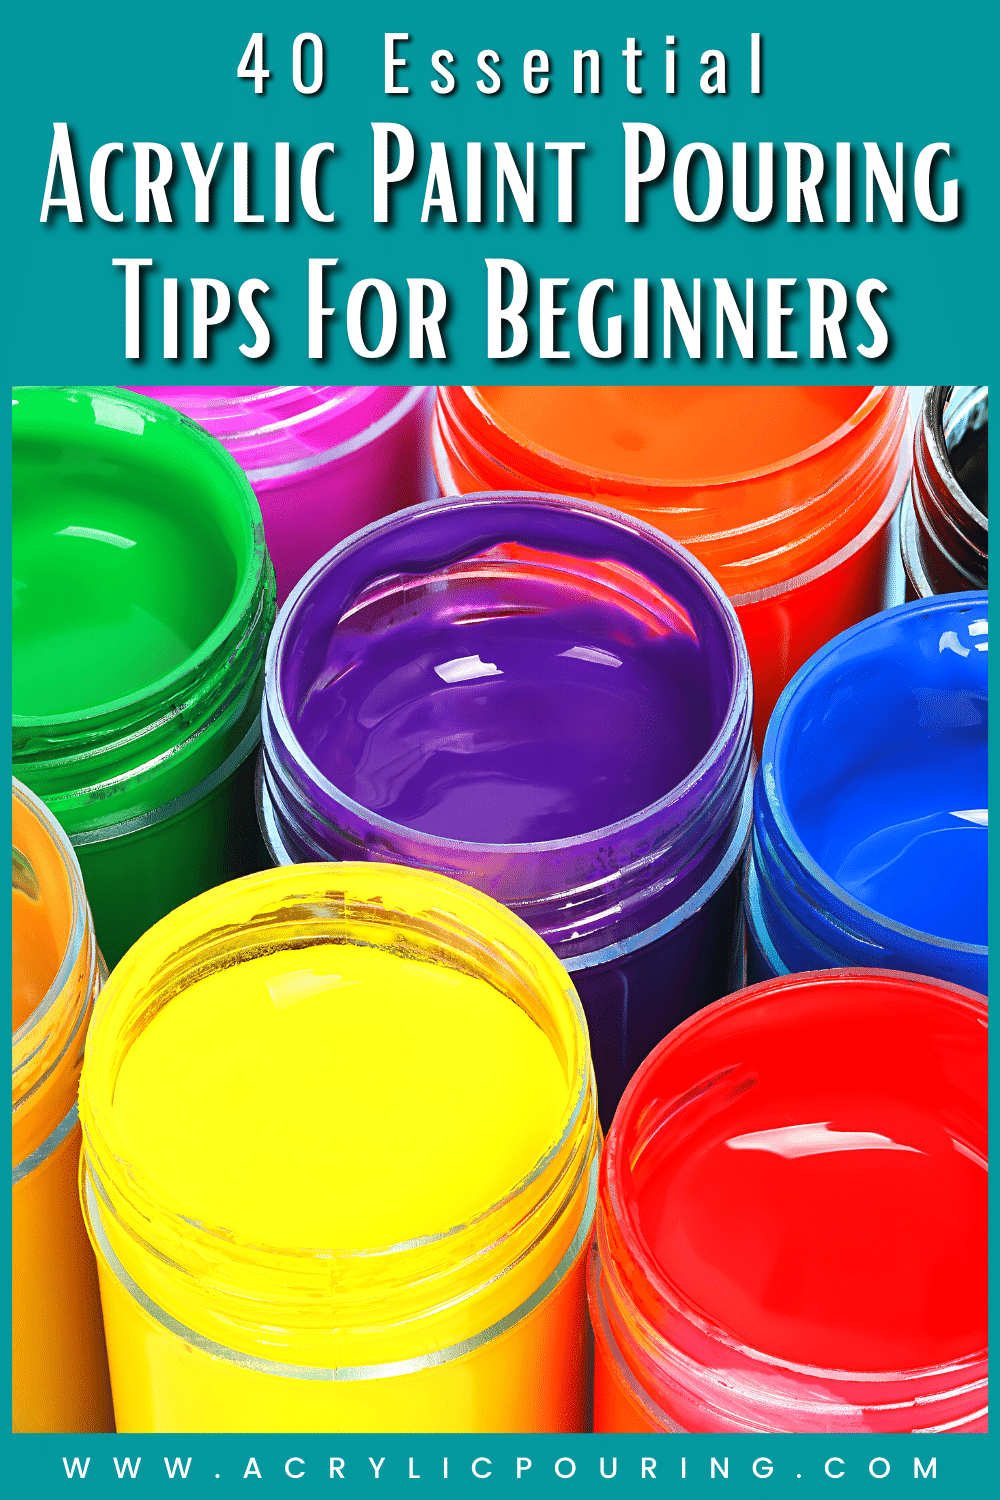 Acrylic pouring (also known as fluid art, liquid art, and paint pouring) is one of the most accessible art forms around, but there are a few things you’ll want to know before you start. I’ve created this tips guide to help paint pouring beginners avoid common pitfalls and use your time more effectively as you learn this new art form. I’ve also included a few techniques that are best to start with. Let’s begin!